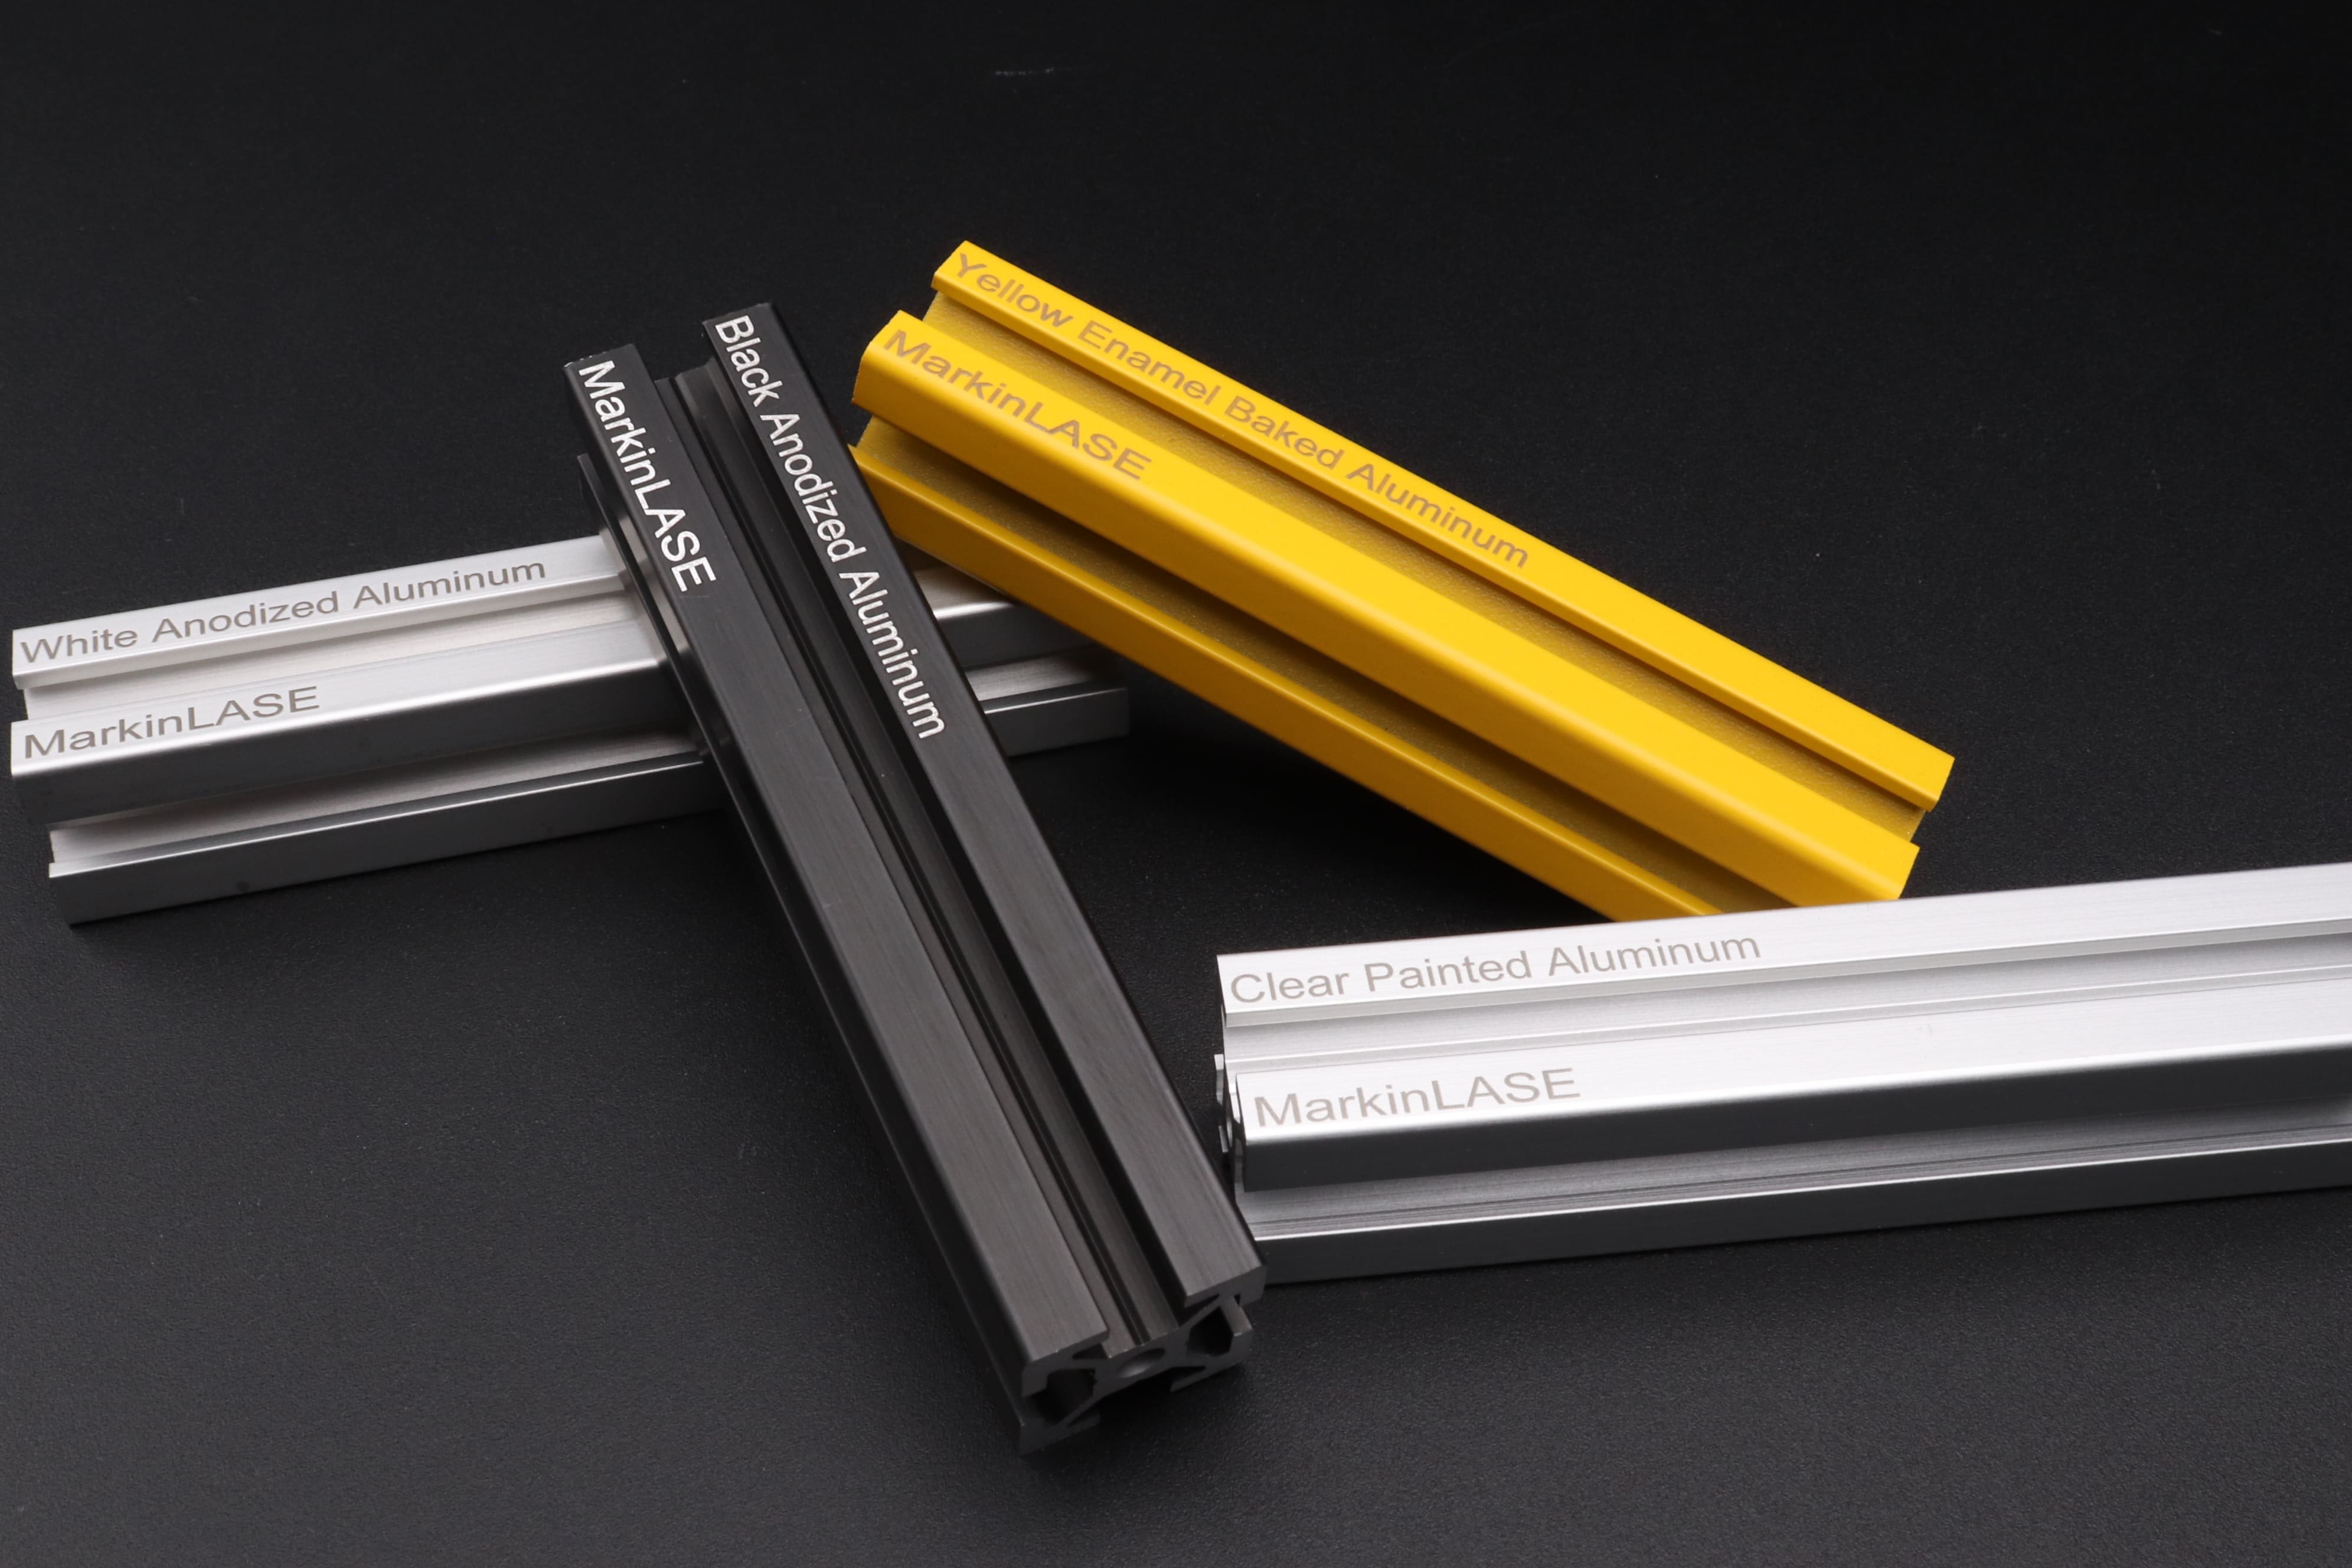 The thin parts of four aluminum materials are engraved with the word 'MarkinLASE' for all and 'White Anodized Aluminum', 'Black Anodized Aluminum', 'Yellow Enamel Baked Aluminum', and 'Clear Painted Aluminum for each'.